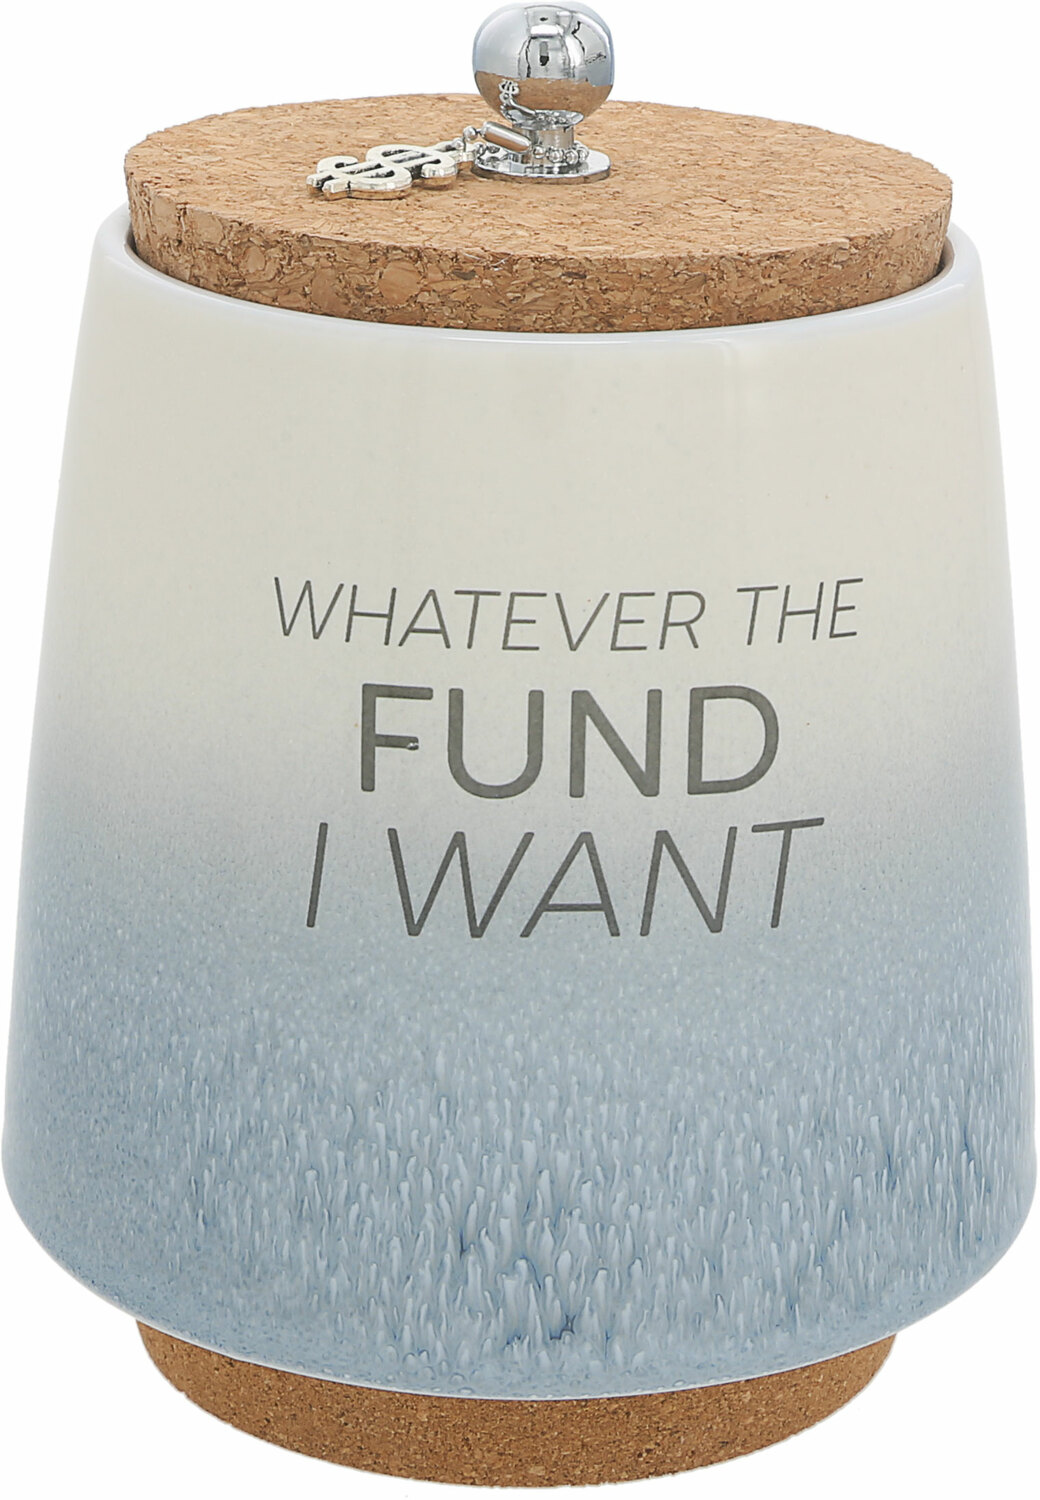 Whatever I Want by So Much Fun-d - Whatever I Want - 6.5" Ceramic Savings Bank